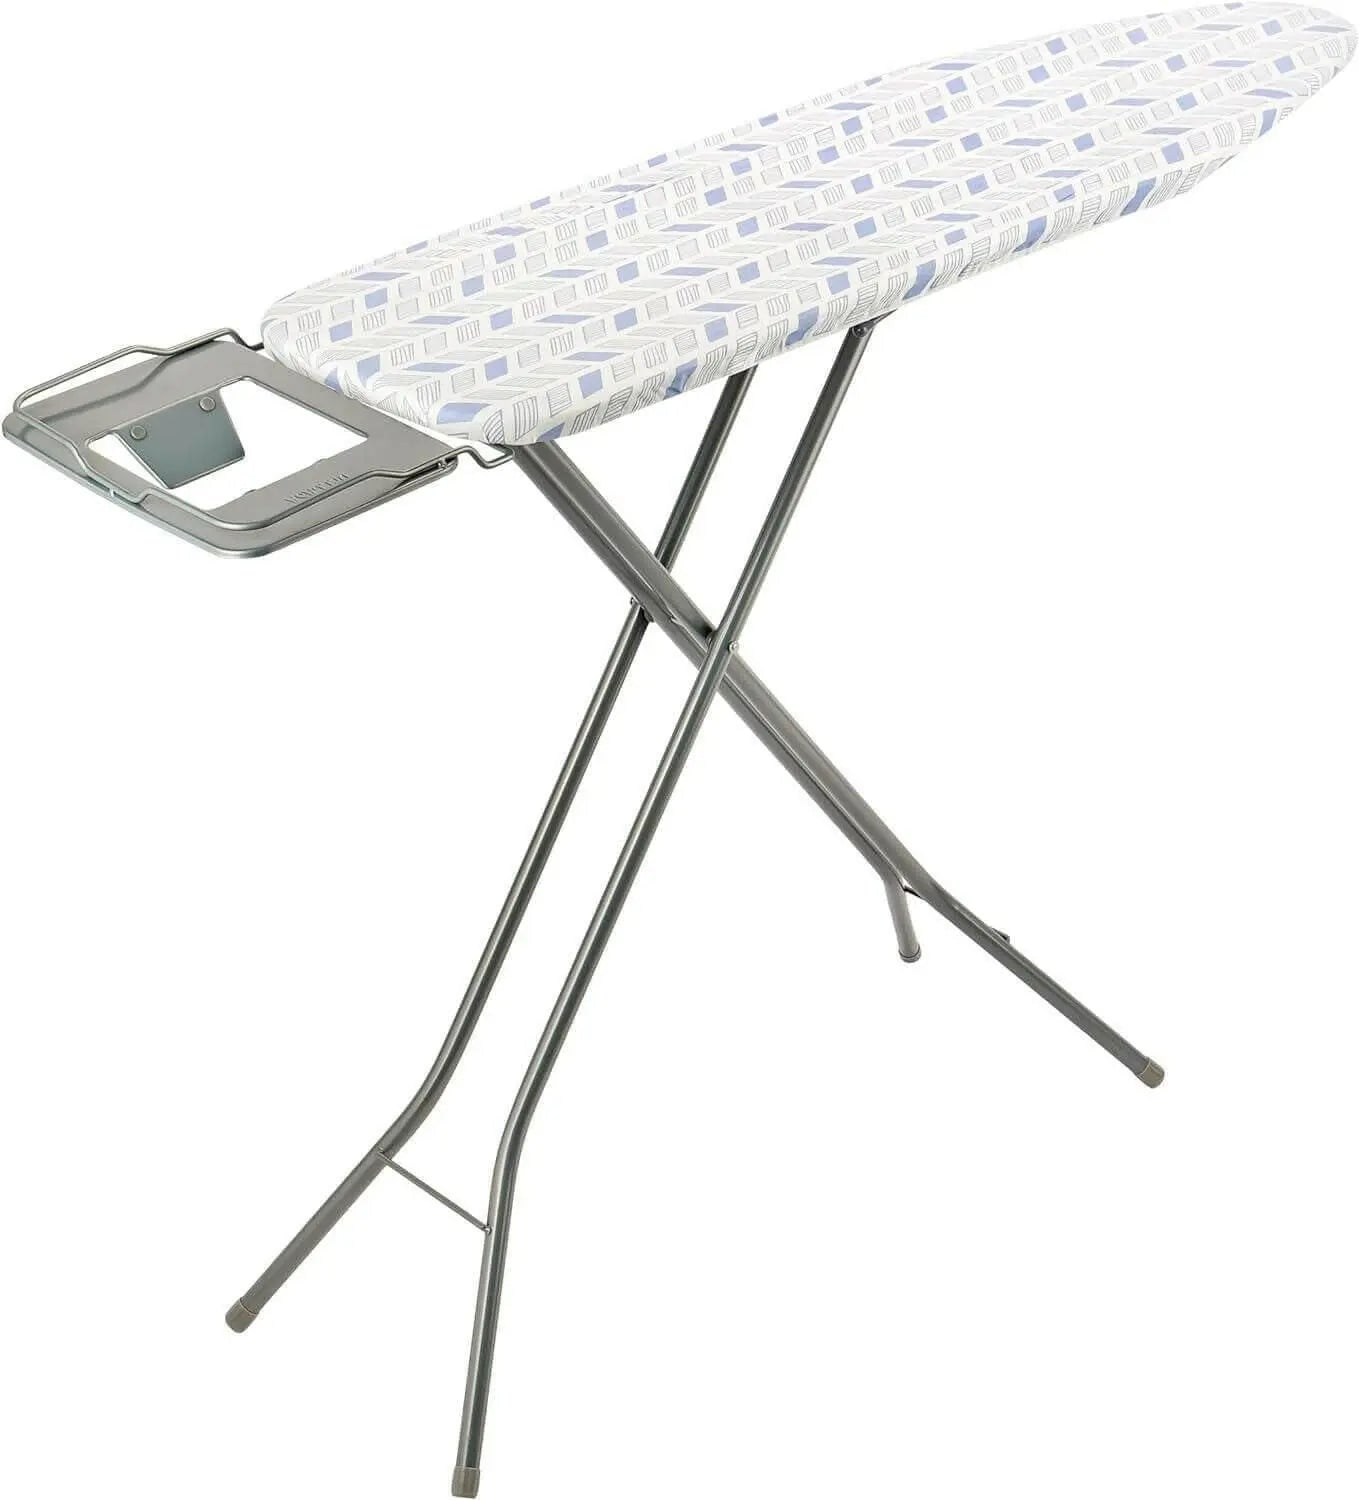 Delcasa 110x34 cm Ironing Board Ironing Table assorted color